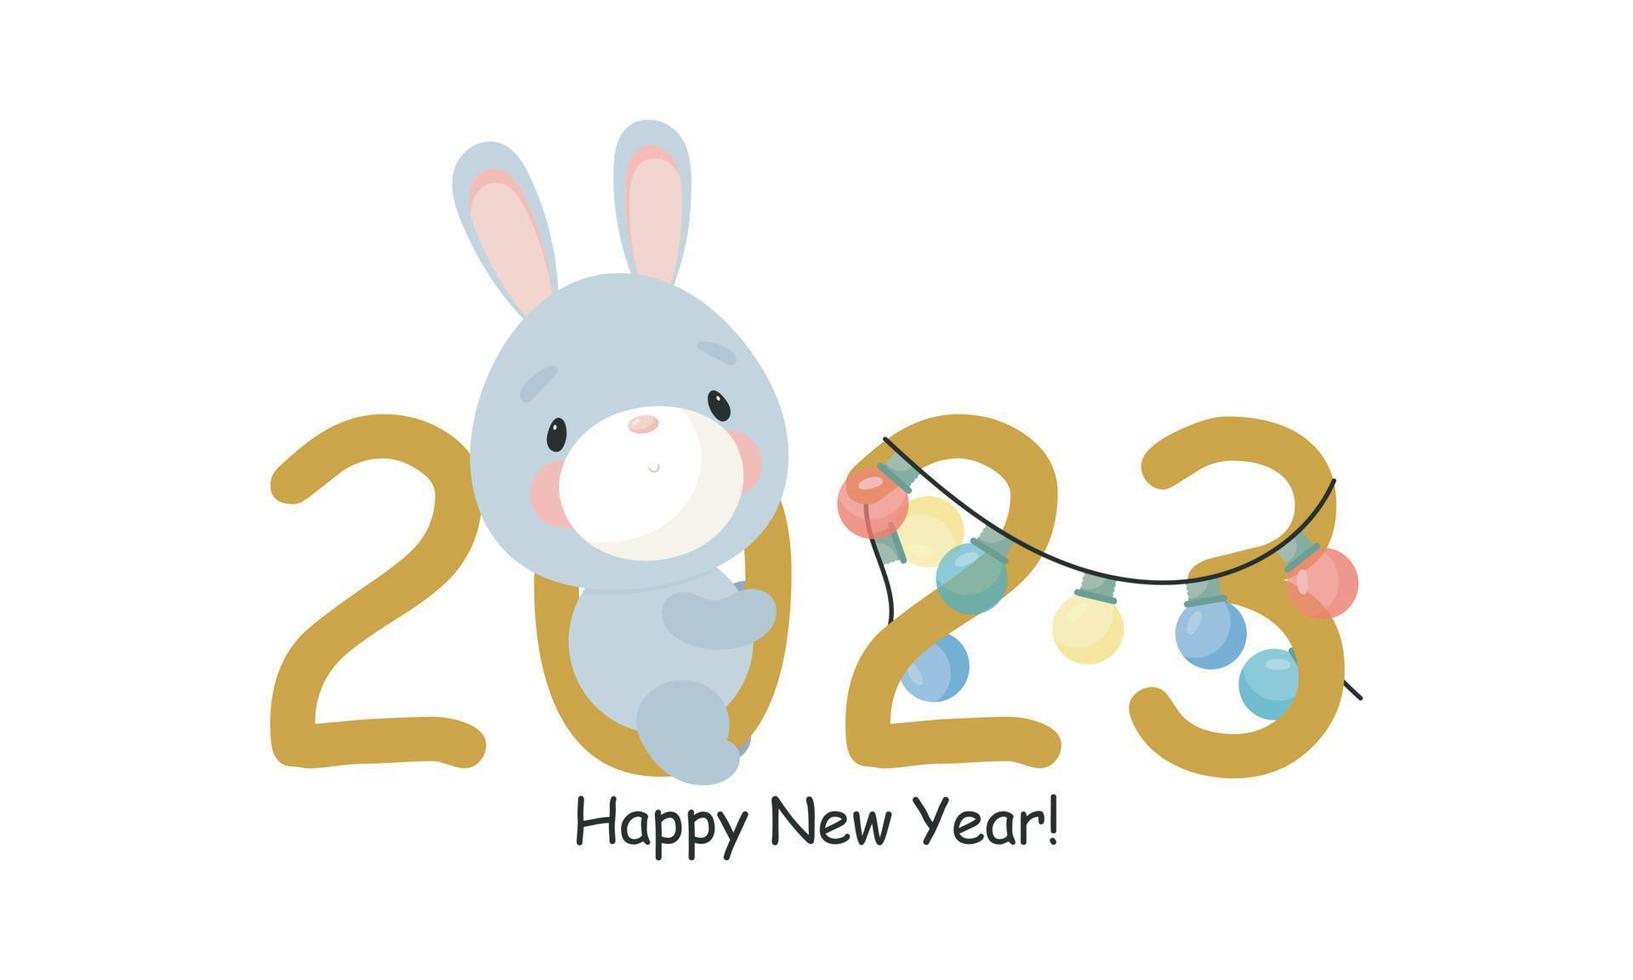 Cute Rabbit with numbers 2023. For card, posters, banners, calendar, invitations. Vector illustration in cartoon style.